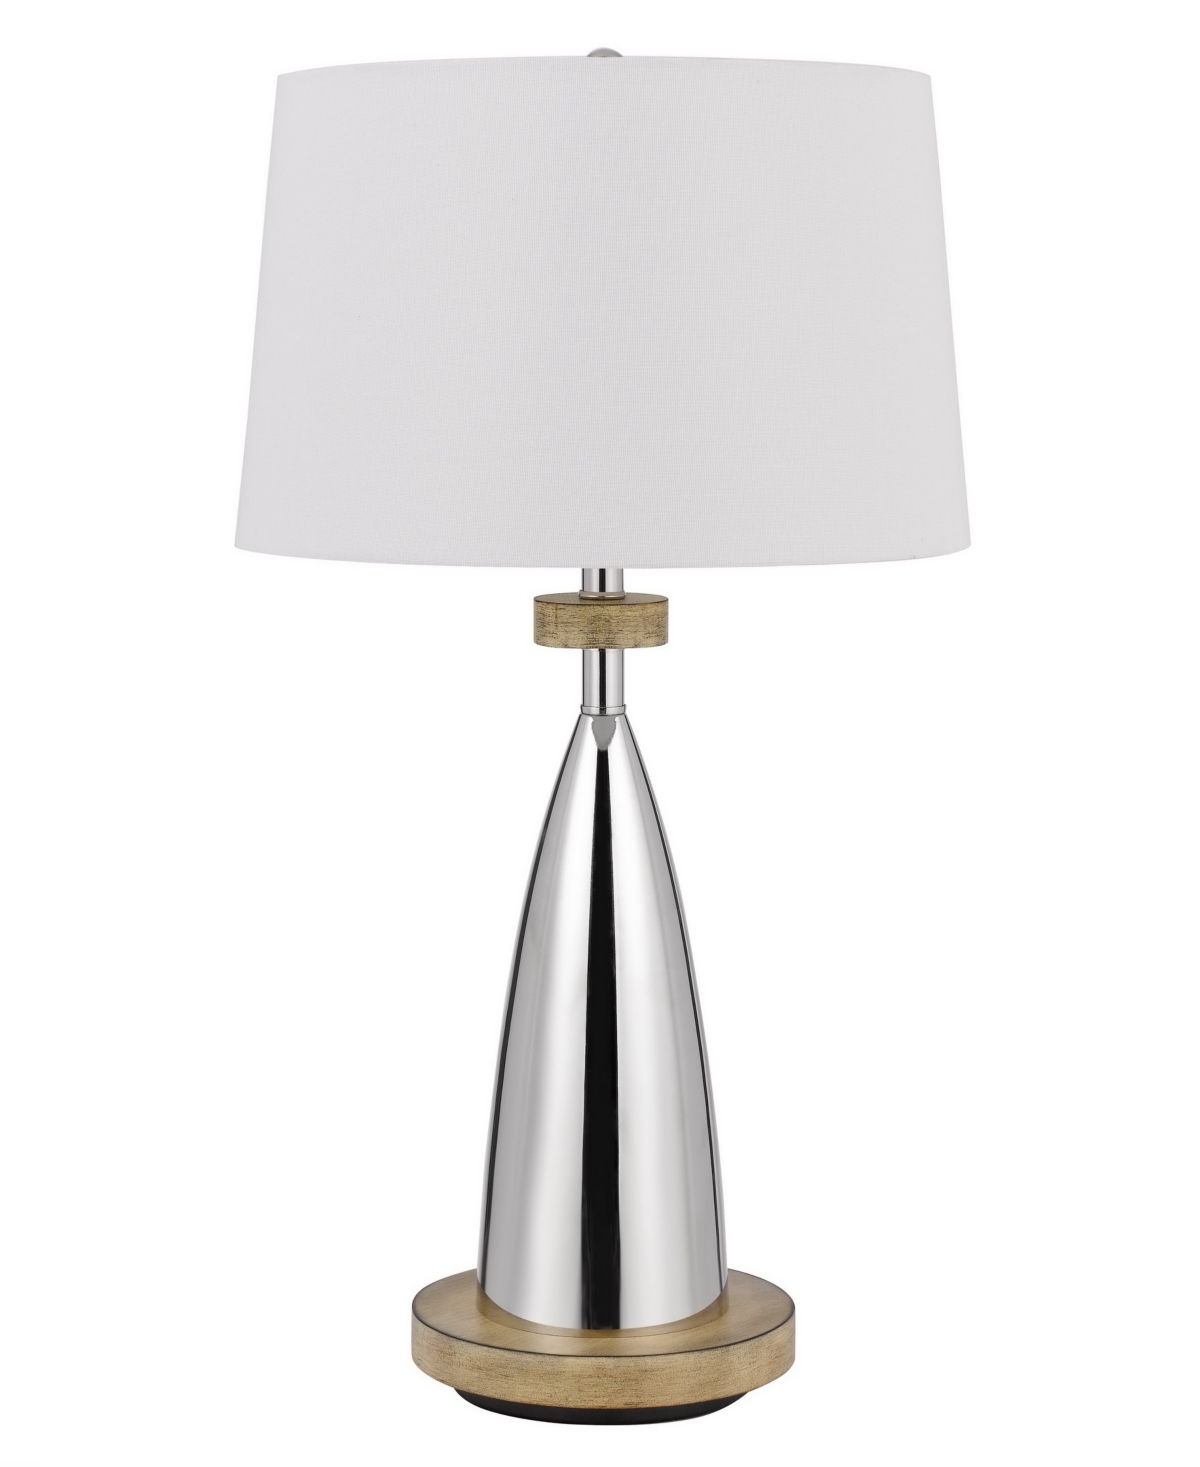 Cal Lighting 31" Height Metal Table Lamp With Wood Accents In Chrome,wood